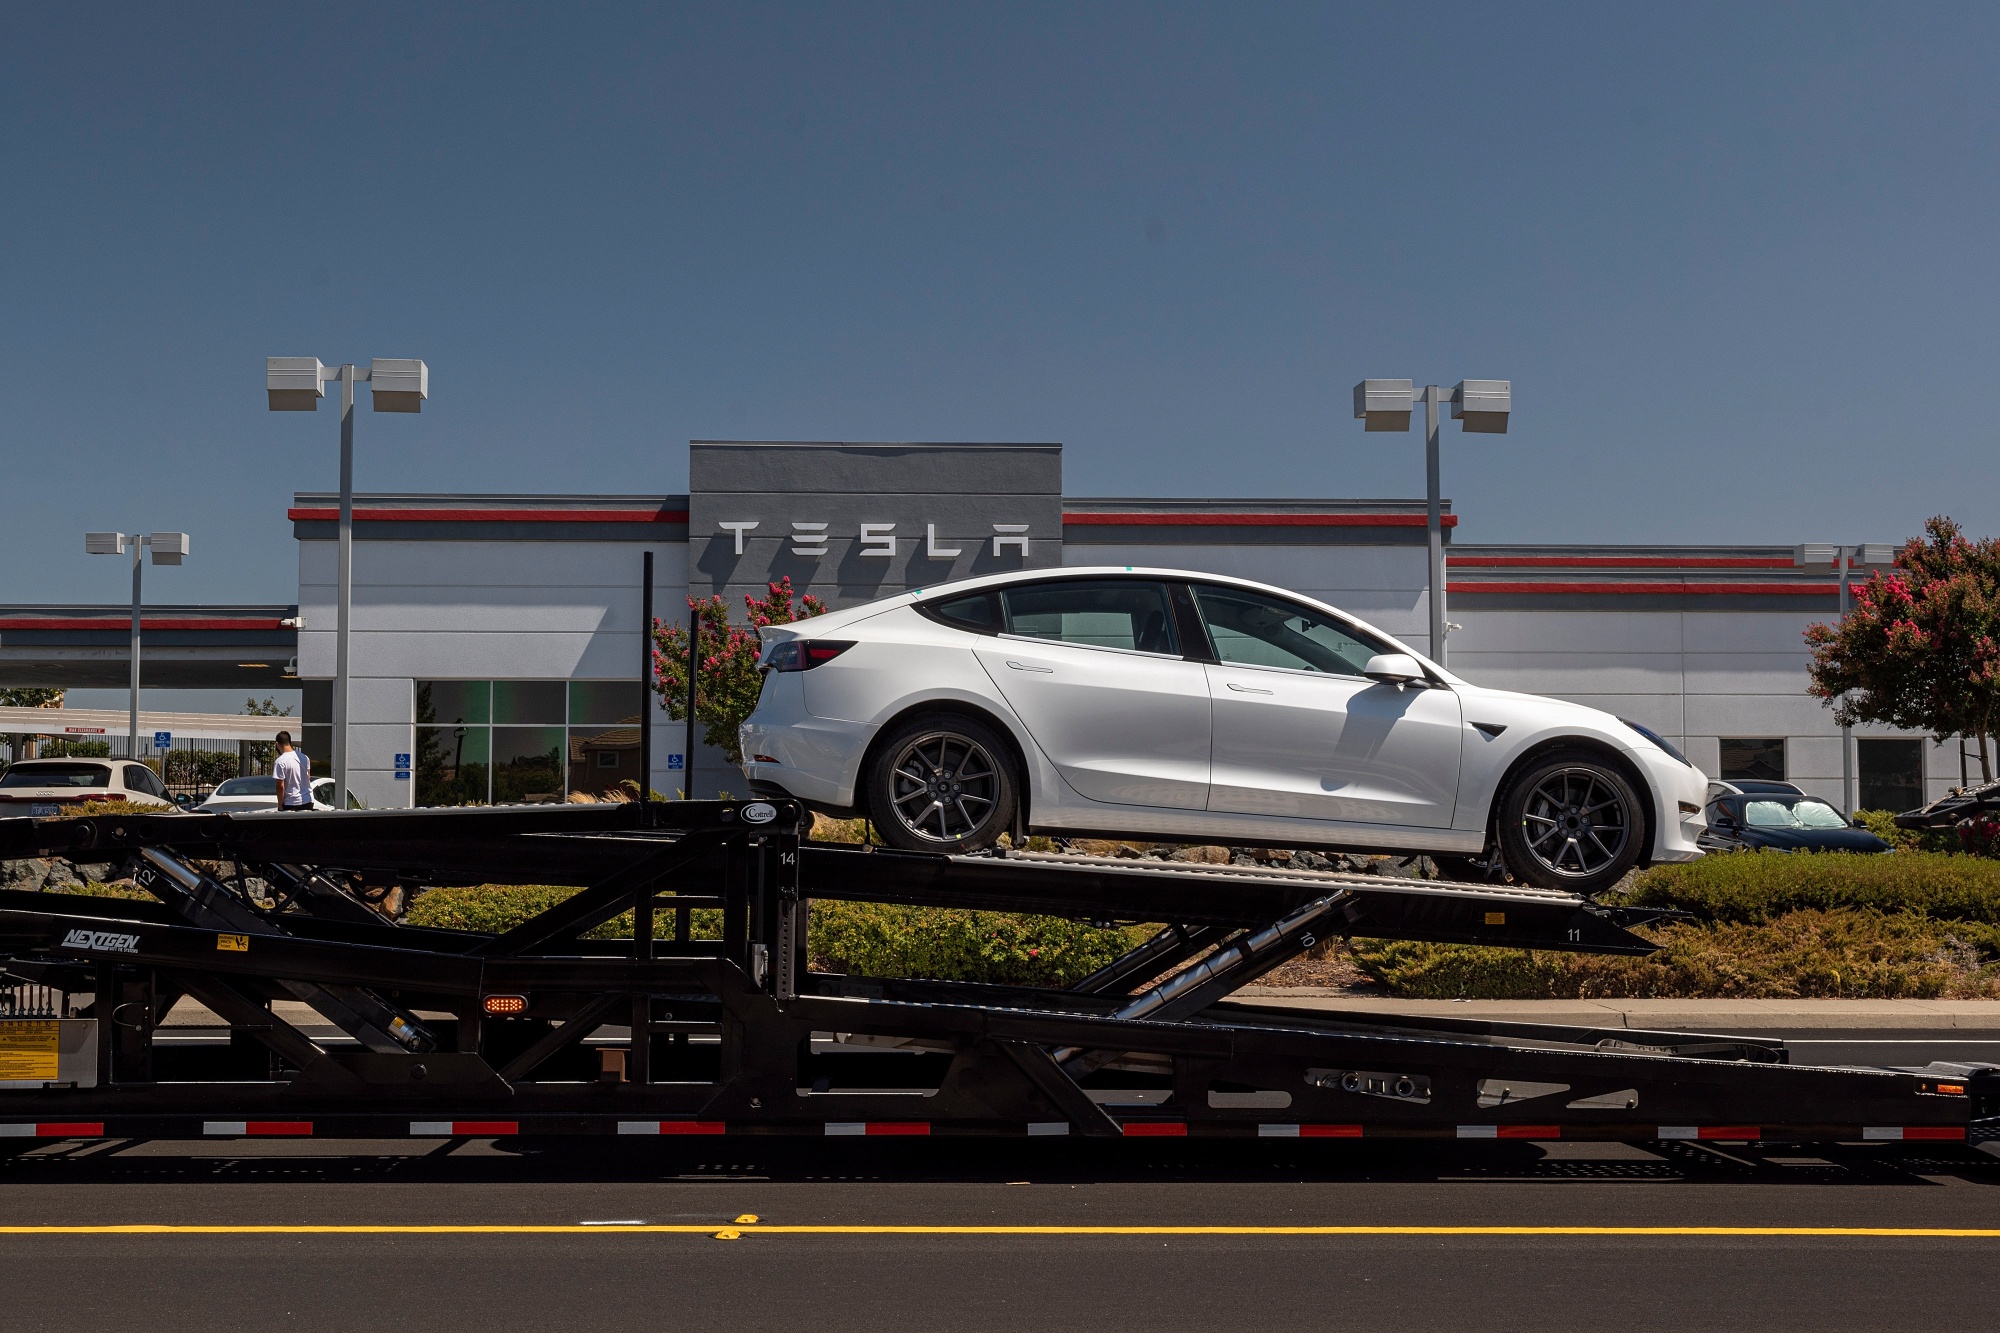 A Tesla Model 3 vehicle on an auto carrier in front of a store in Rocklin, California.